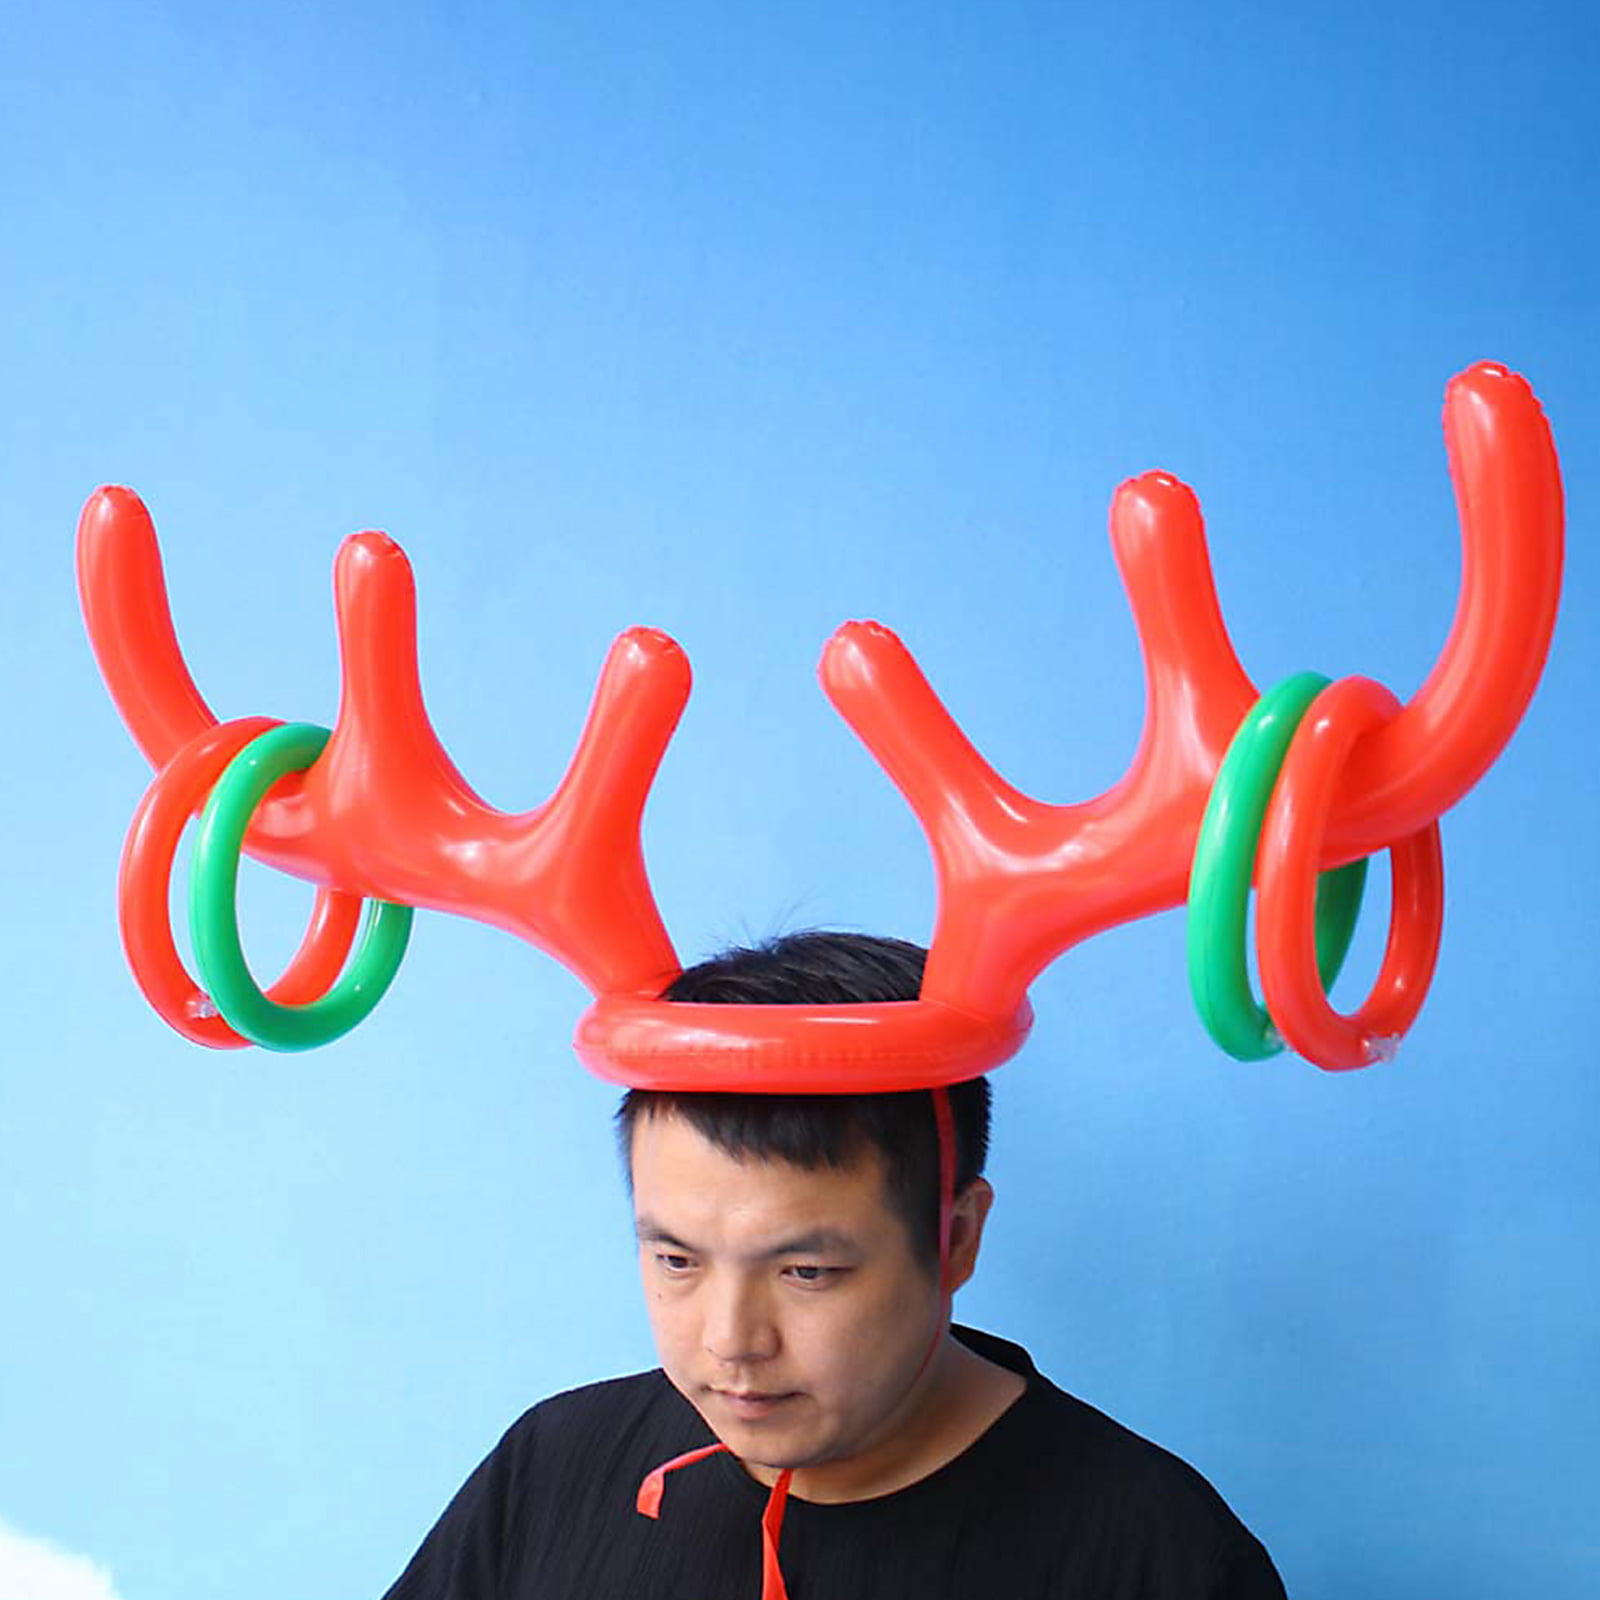 COSORO 2Pcs Christmas Party Inflatable Reindeer Antler Hat Ring Toss Game with Rings for Family Kids Office Xmas Holiday Party Fun Games